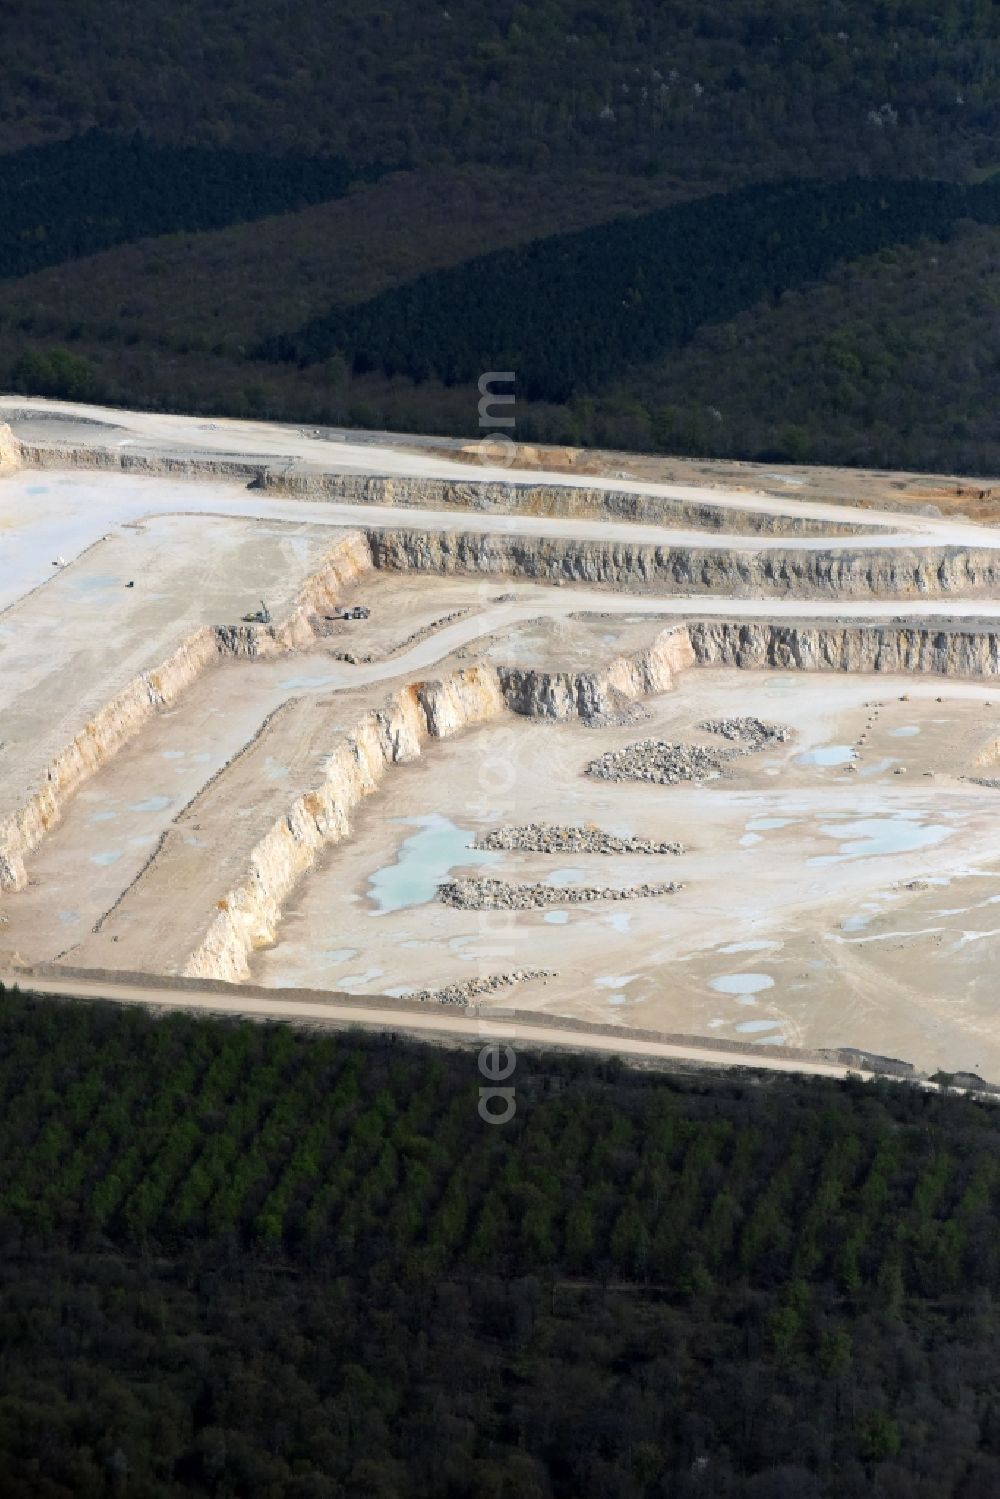 Aerial image Sorcy-Saint-Martin - Quarry for the mining and handling of sandstone in Sorcy-Saint-Martin in Alsace-Champagne-Ardenne-Lorraine, France